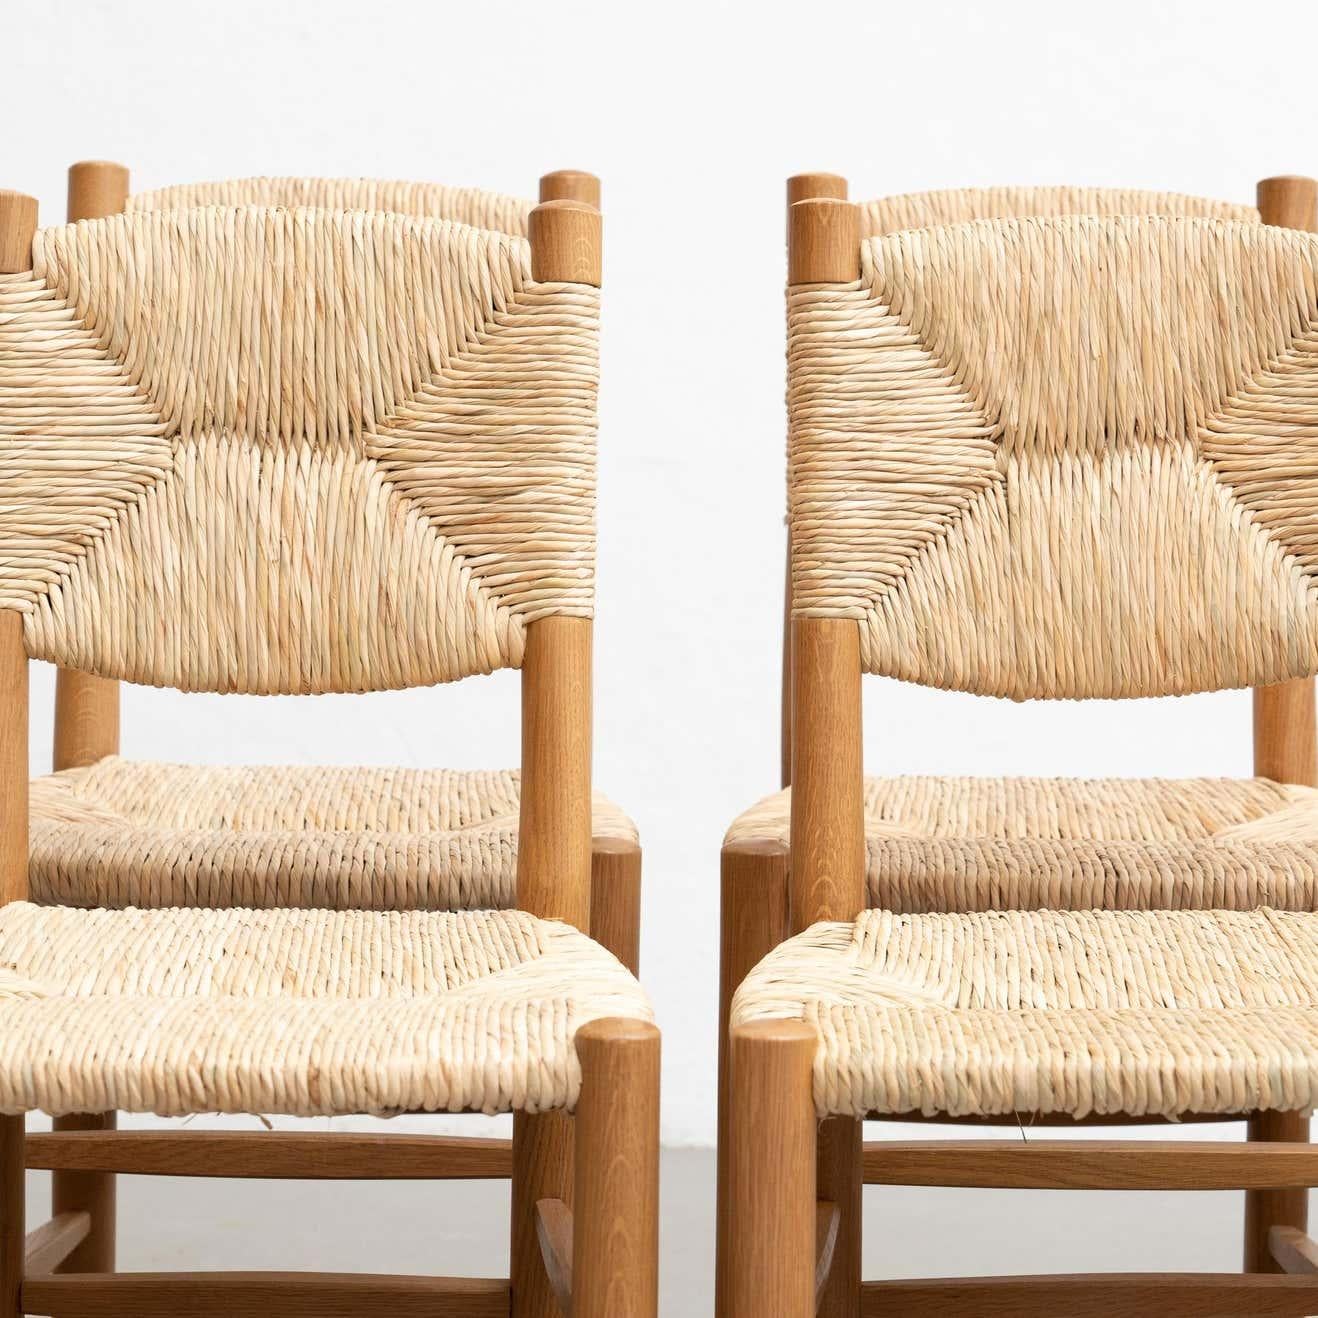 Late 20th Century Set of Six After Charlotte Perriand N.19 Chairs, Wood Rattan, Mid-Century Modern For Sale